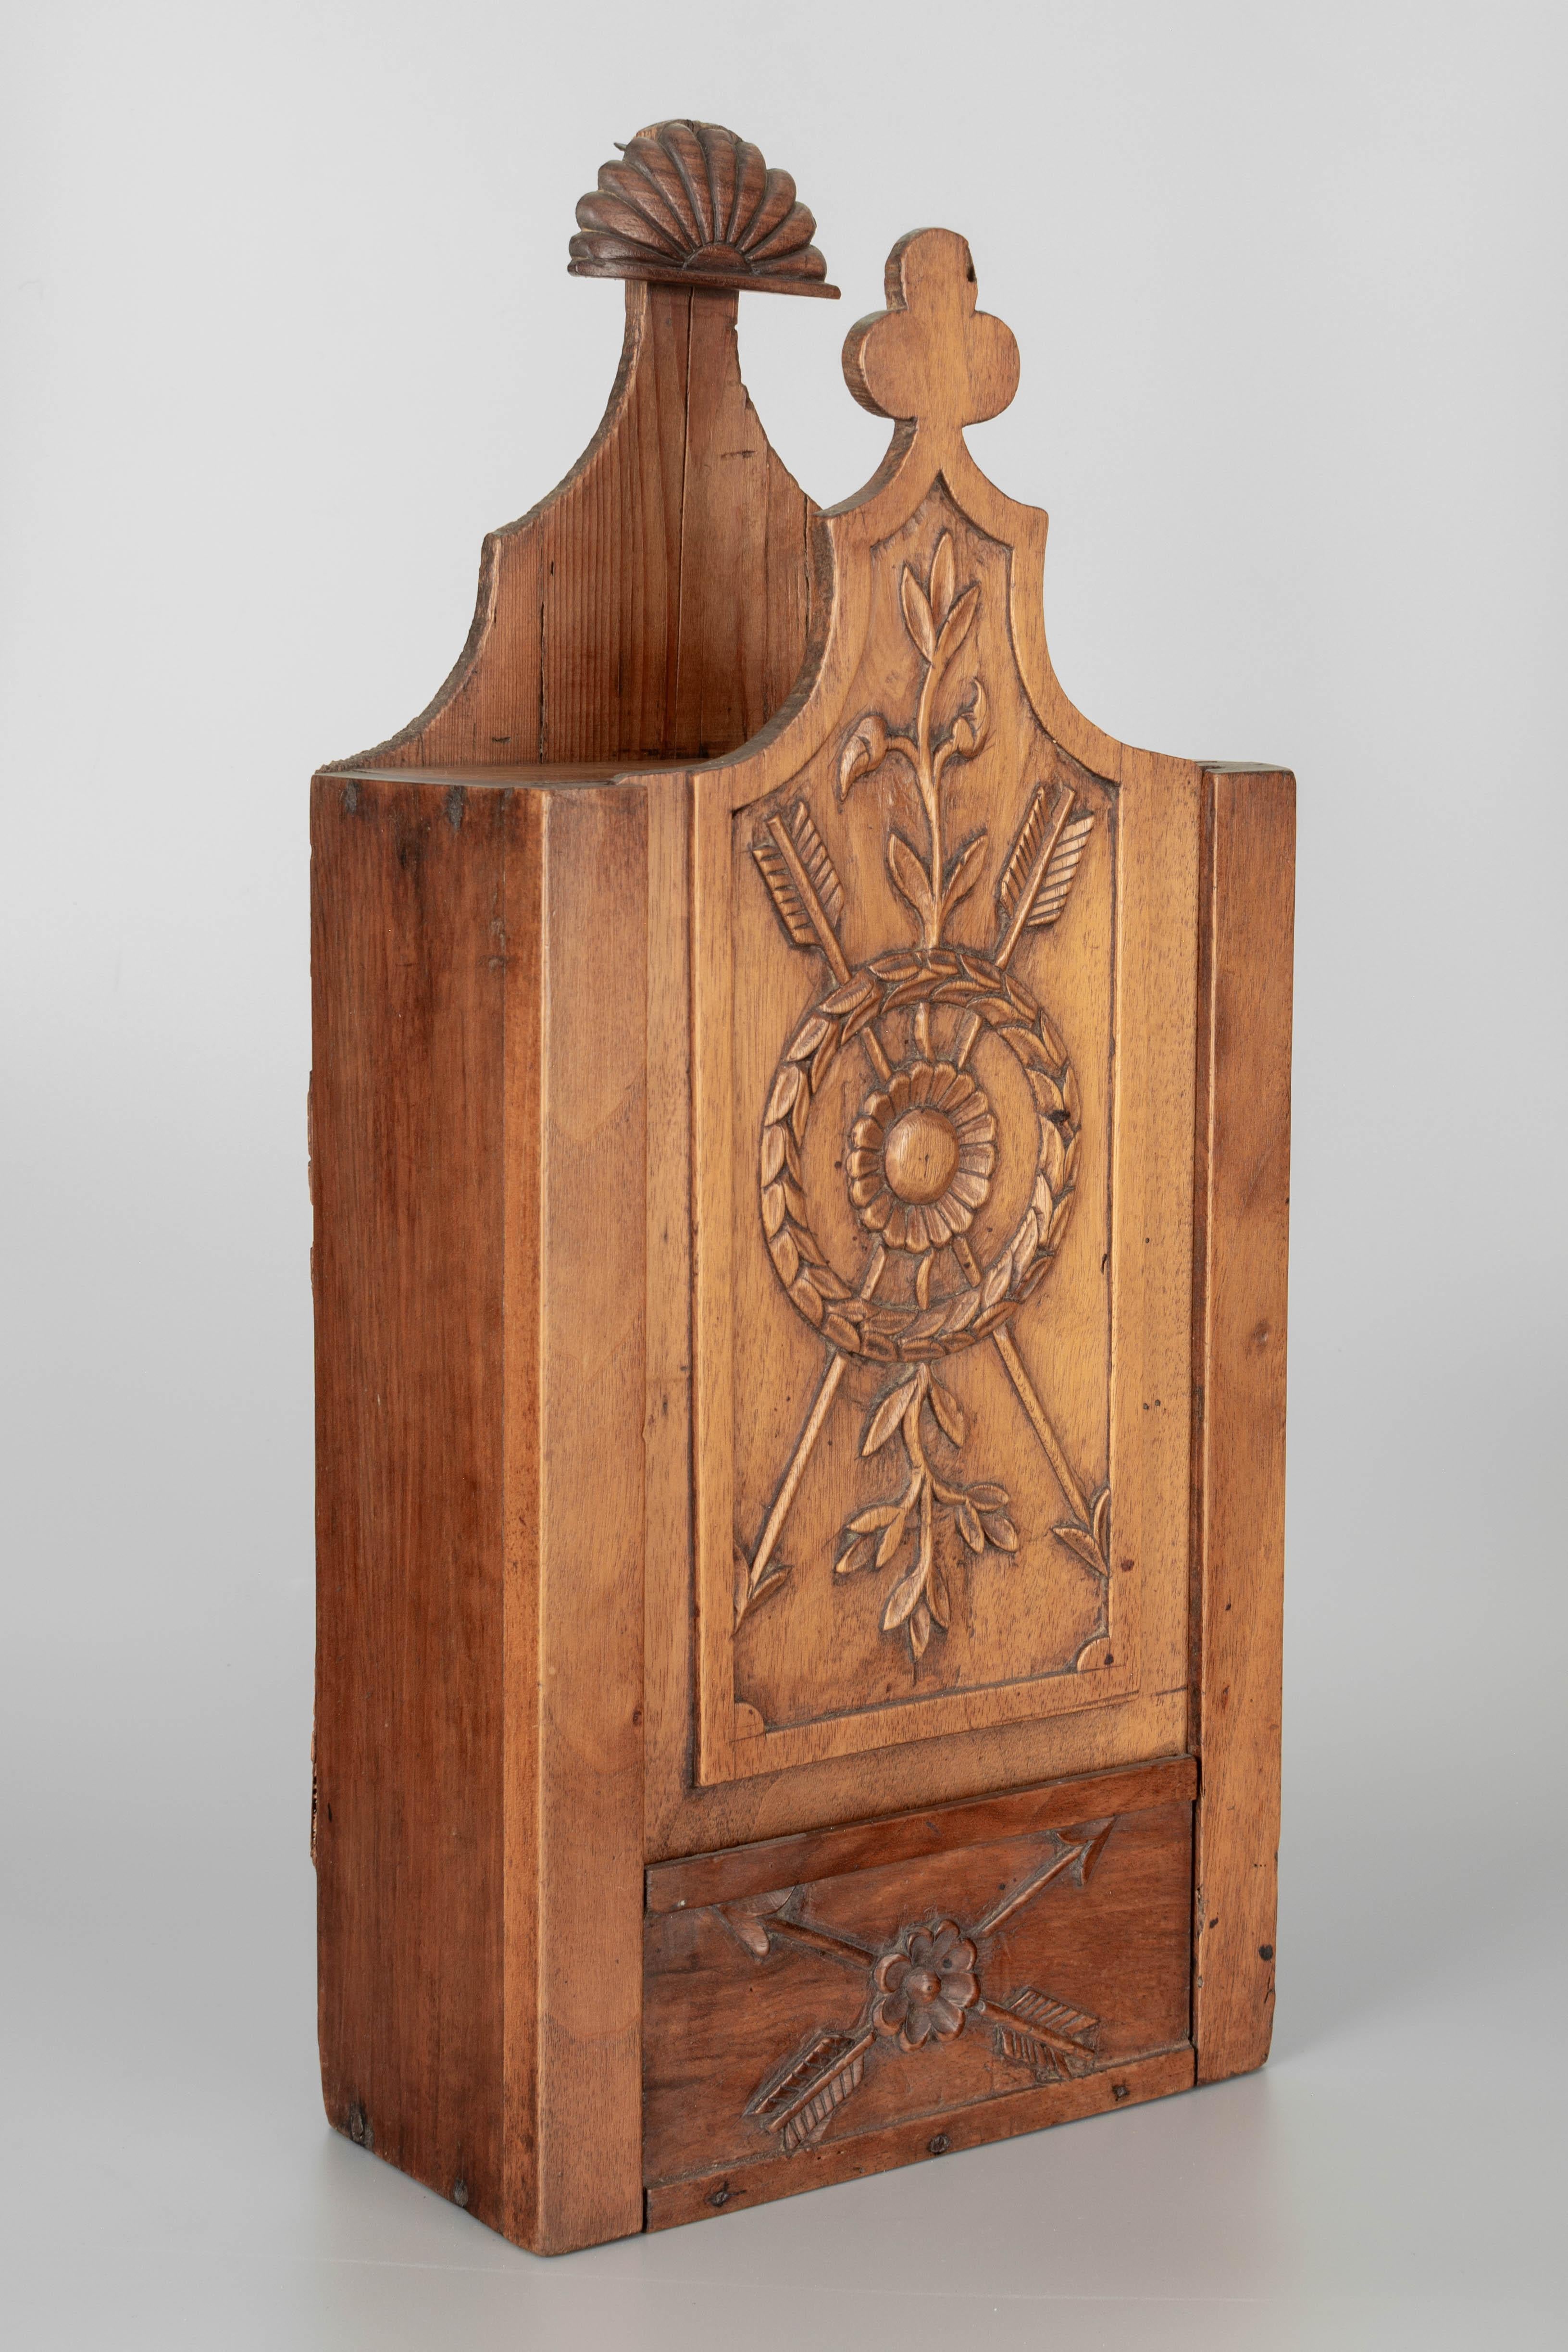 A 19th century French Provençal fariniere, or decorative box made of walnut with fine hand-carved decoration. Waxed patina. This beautifully crafted household item was commonly given as a wedding gift and would be displayed on the wall and used in